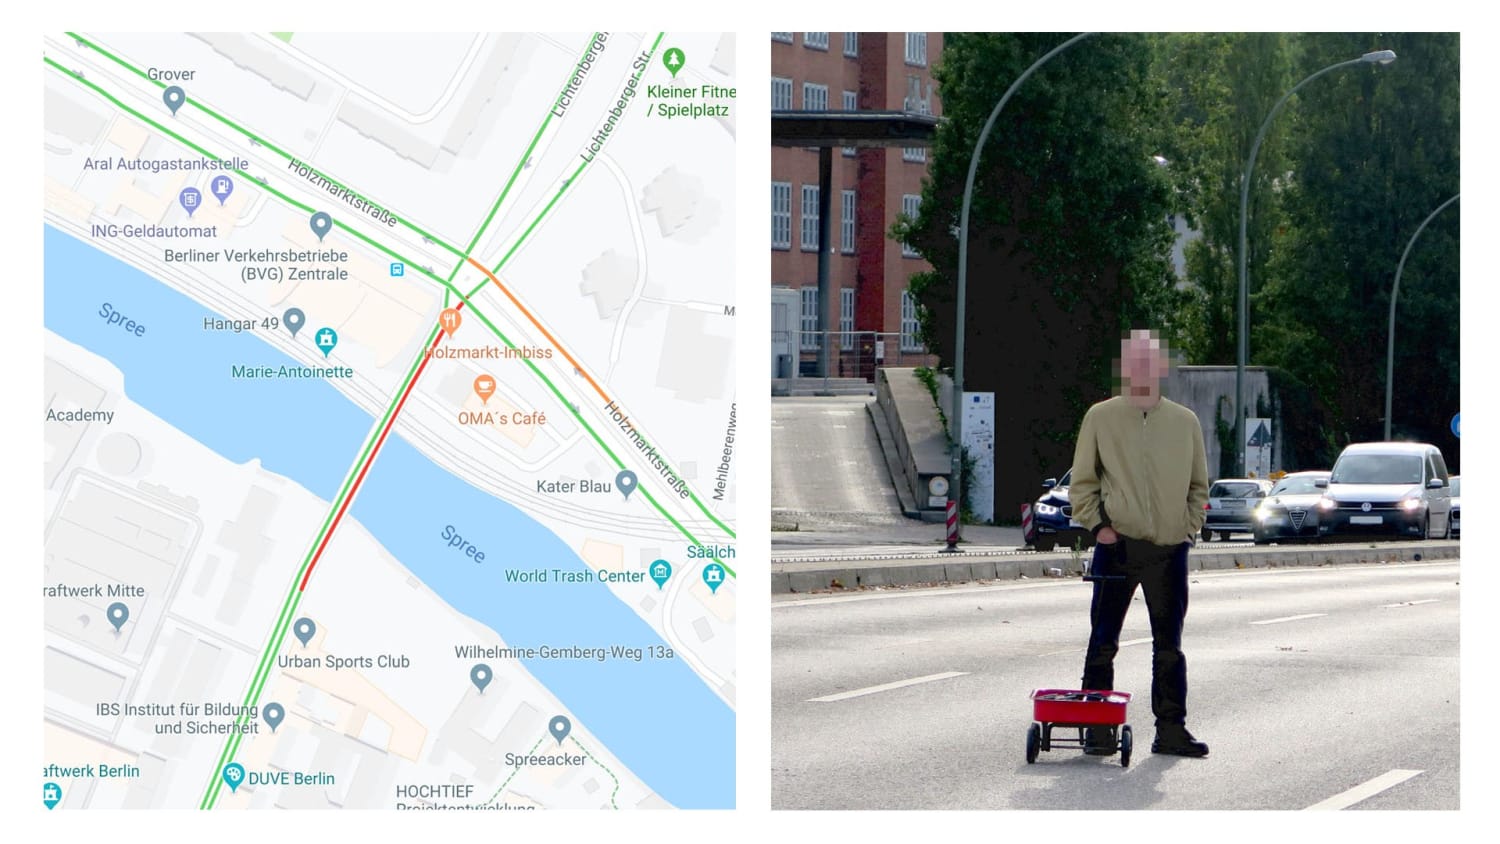 This Guy Created A 'Virtual Traffic Jam' On Google Maps Using 99 Phones And A Handcart